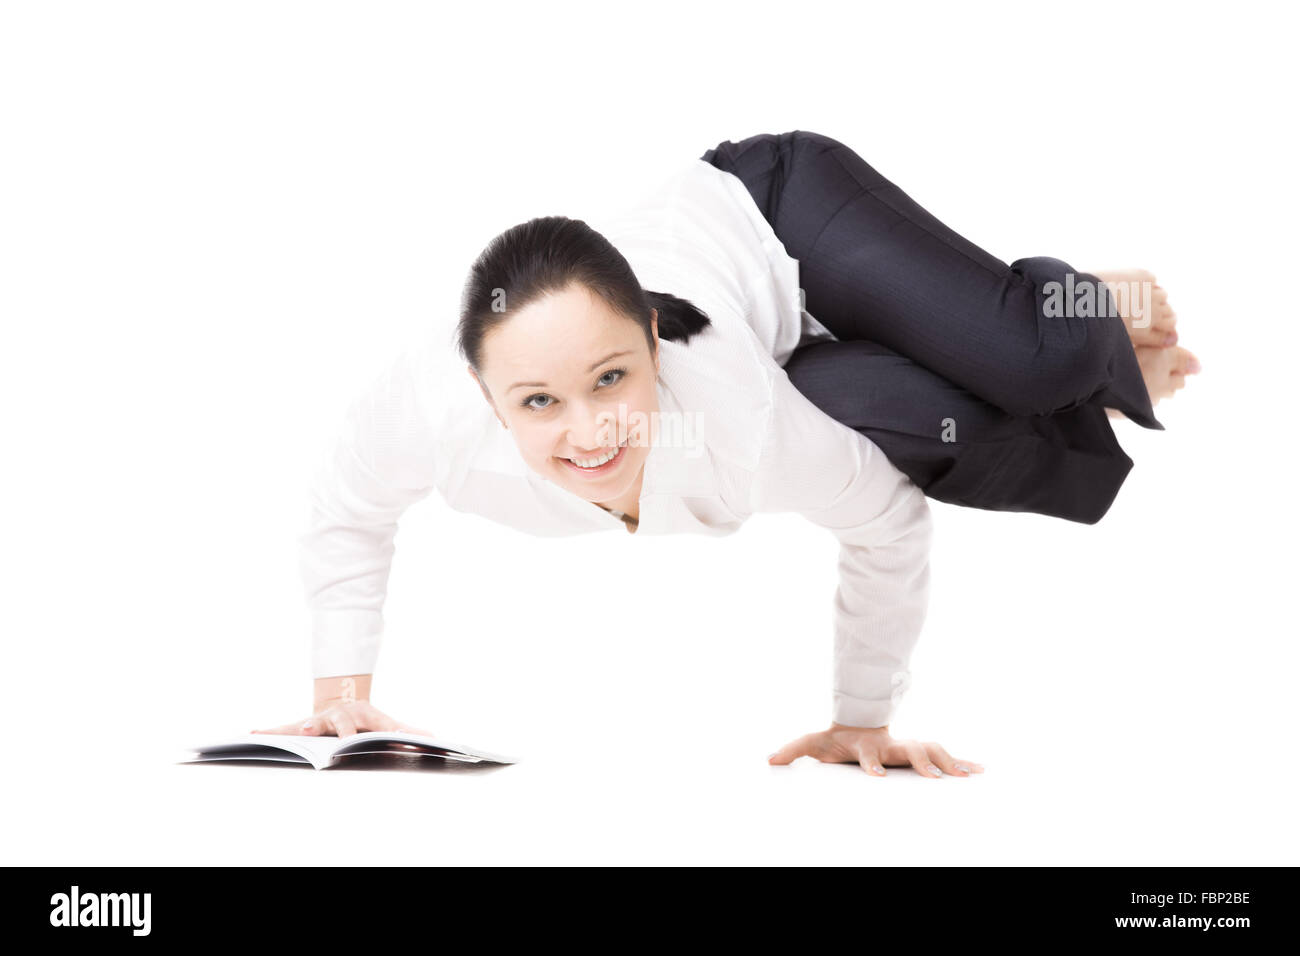 Business, study, healthy lifestyle. Smiling young female office employee in formalwear reading book, doing fitness exercises Stock Photo